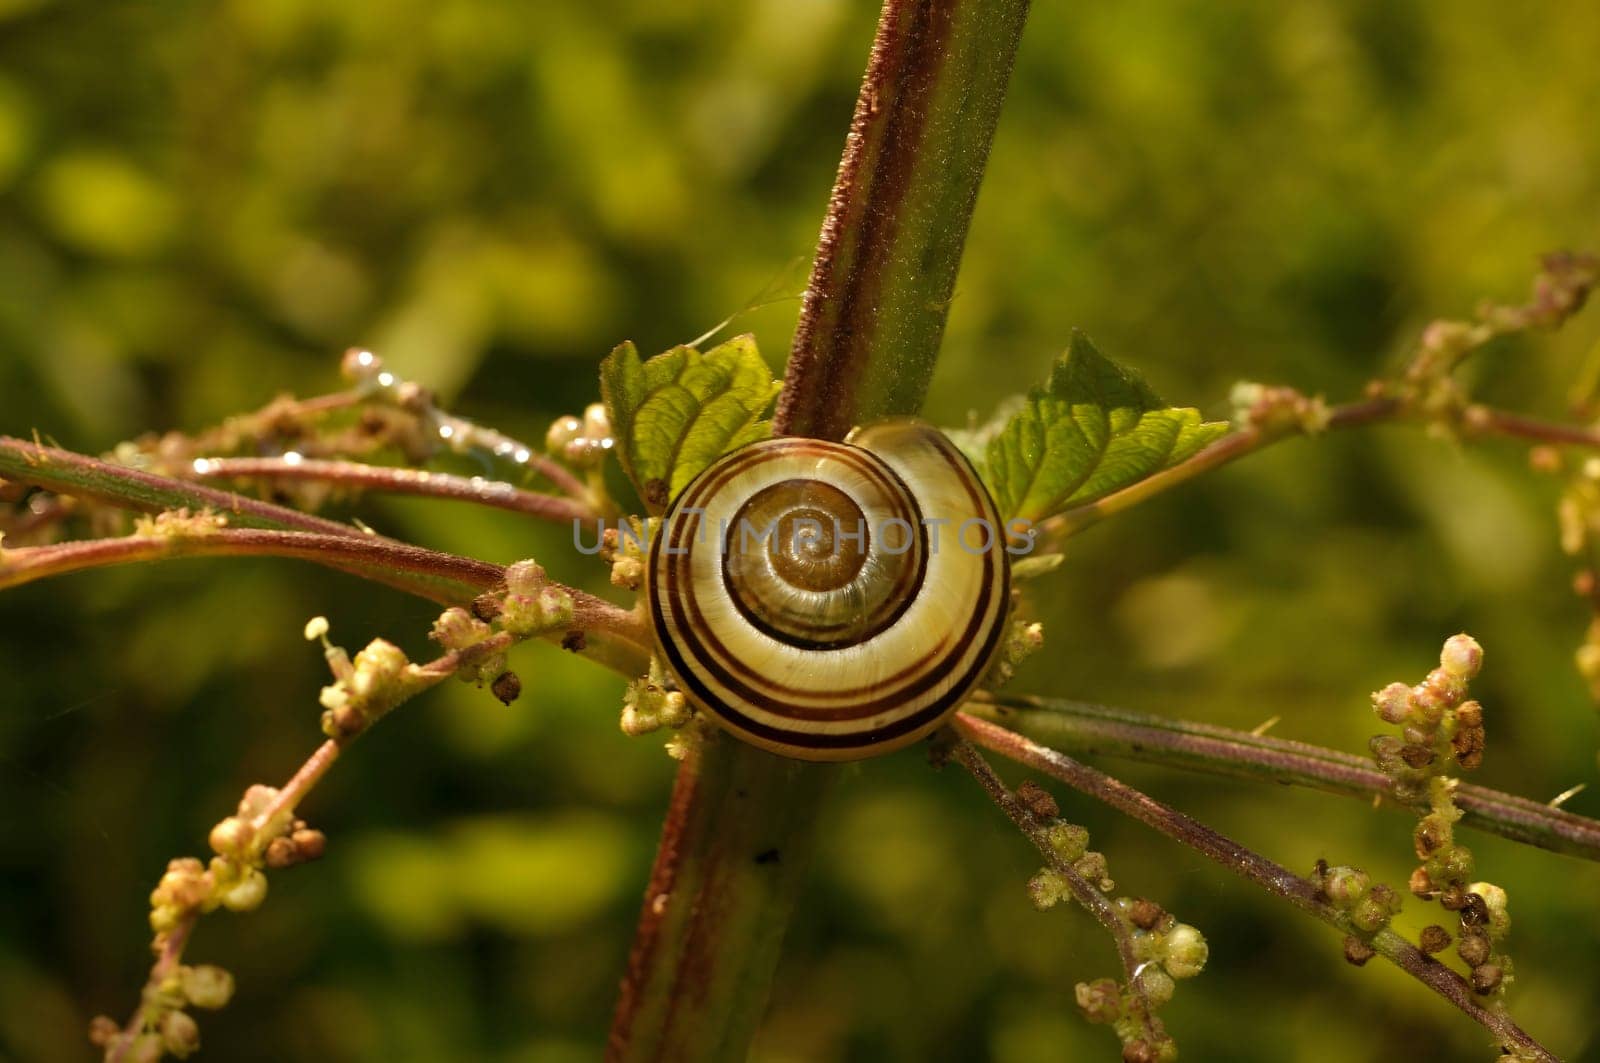 A small snail gracefully crawls along a vibrant green twig, showcasing the beauty of nature's intricate details.